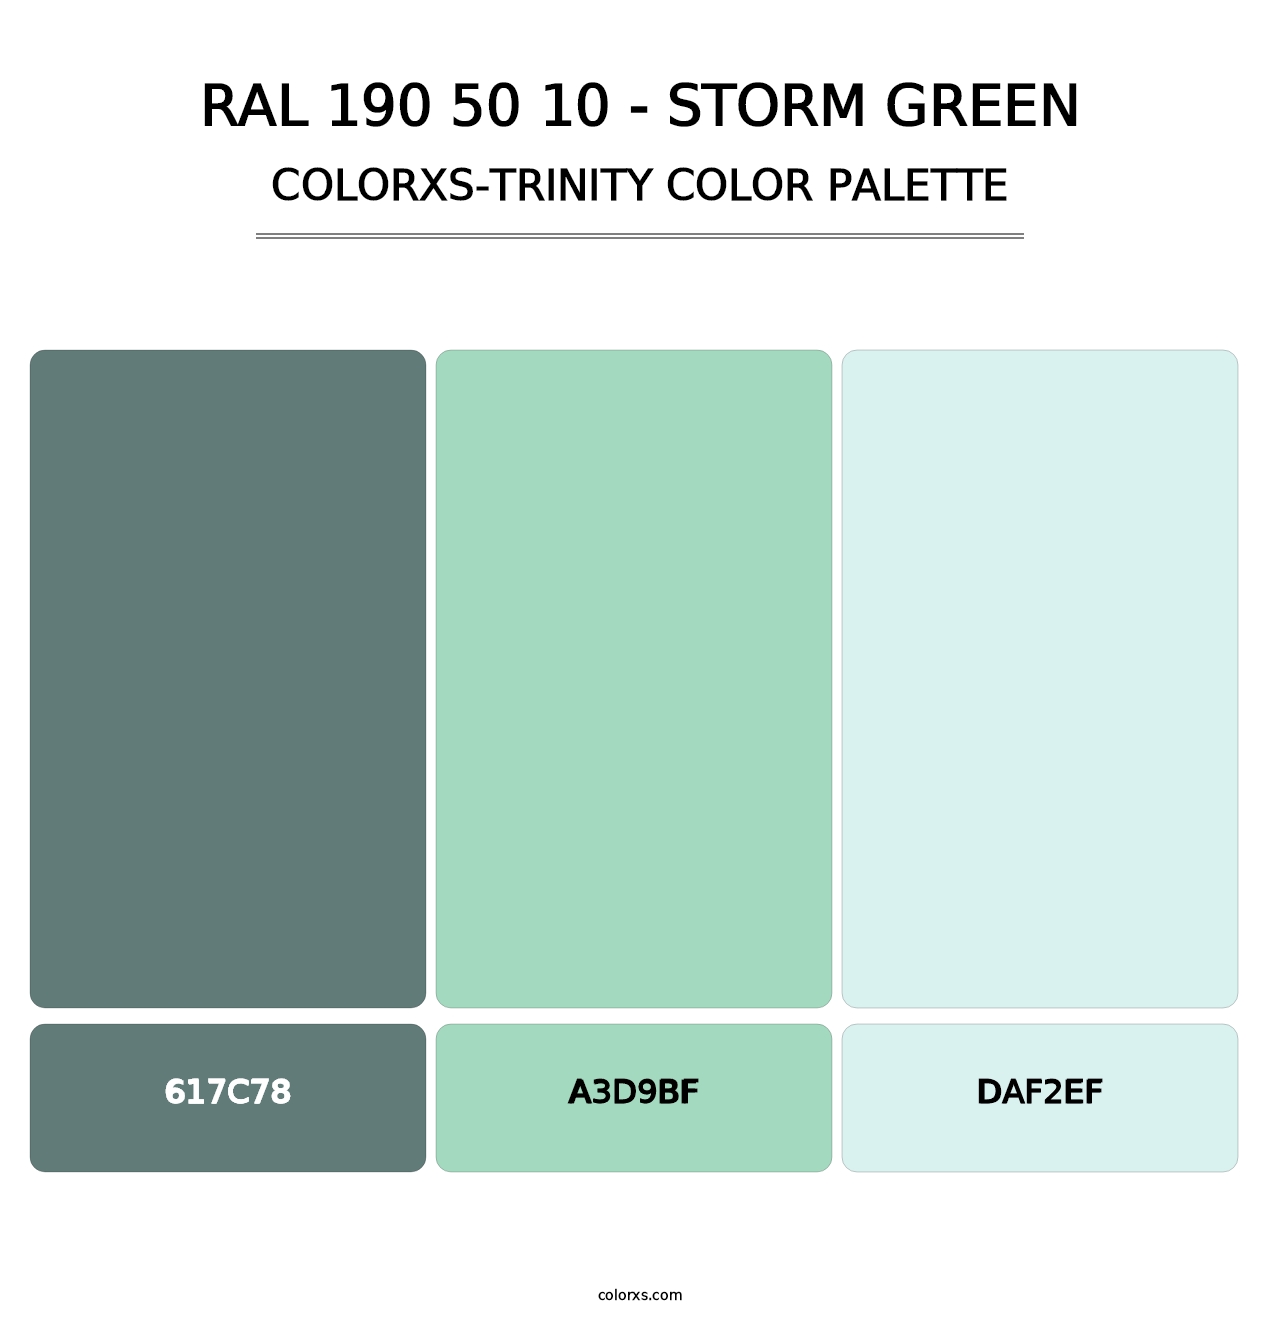 RAL 190 50 10 - Storm Green - Colorxs Trinity Palette